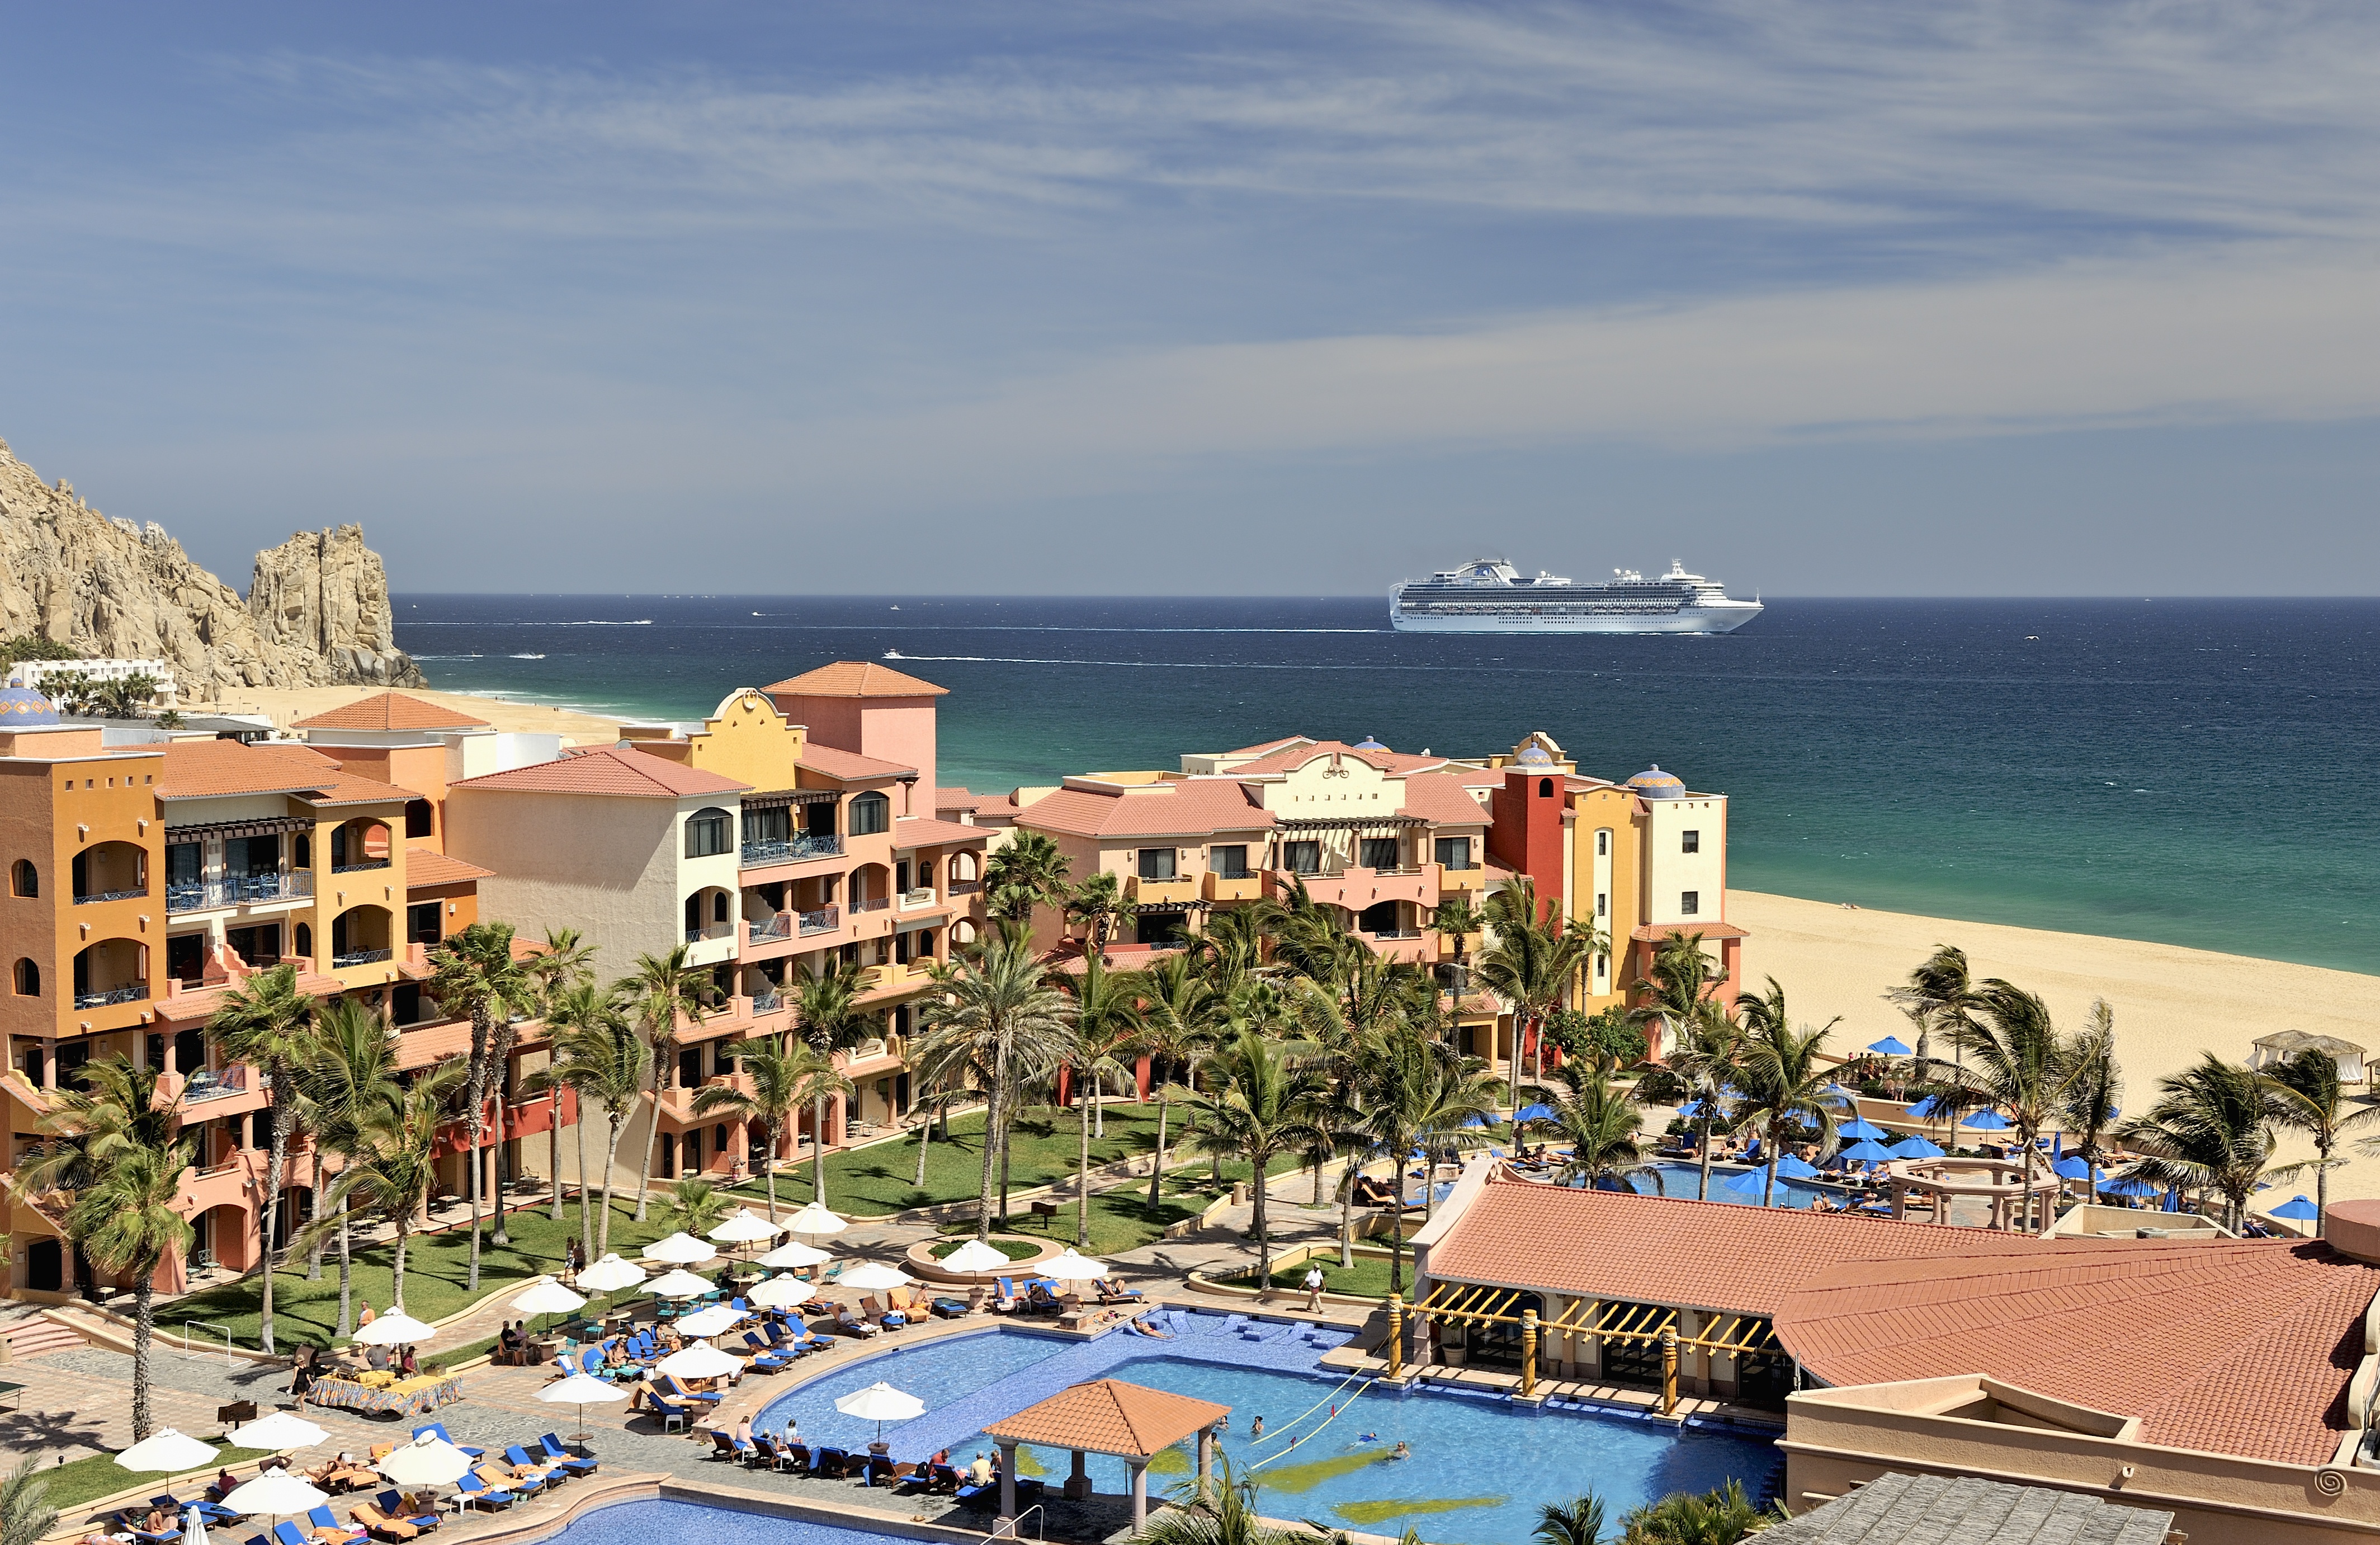 bigstock-Cruise-Ship-And-Resort-In-Cabo-5342170